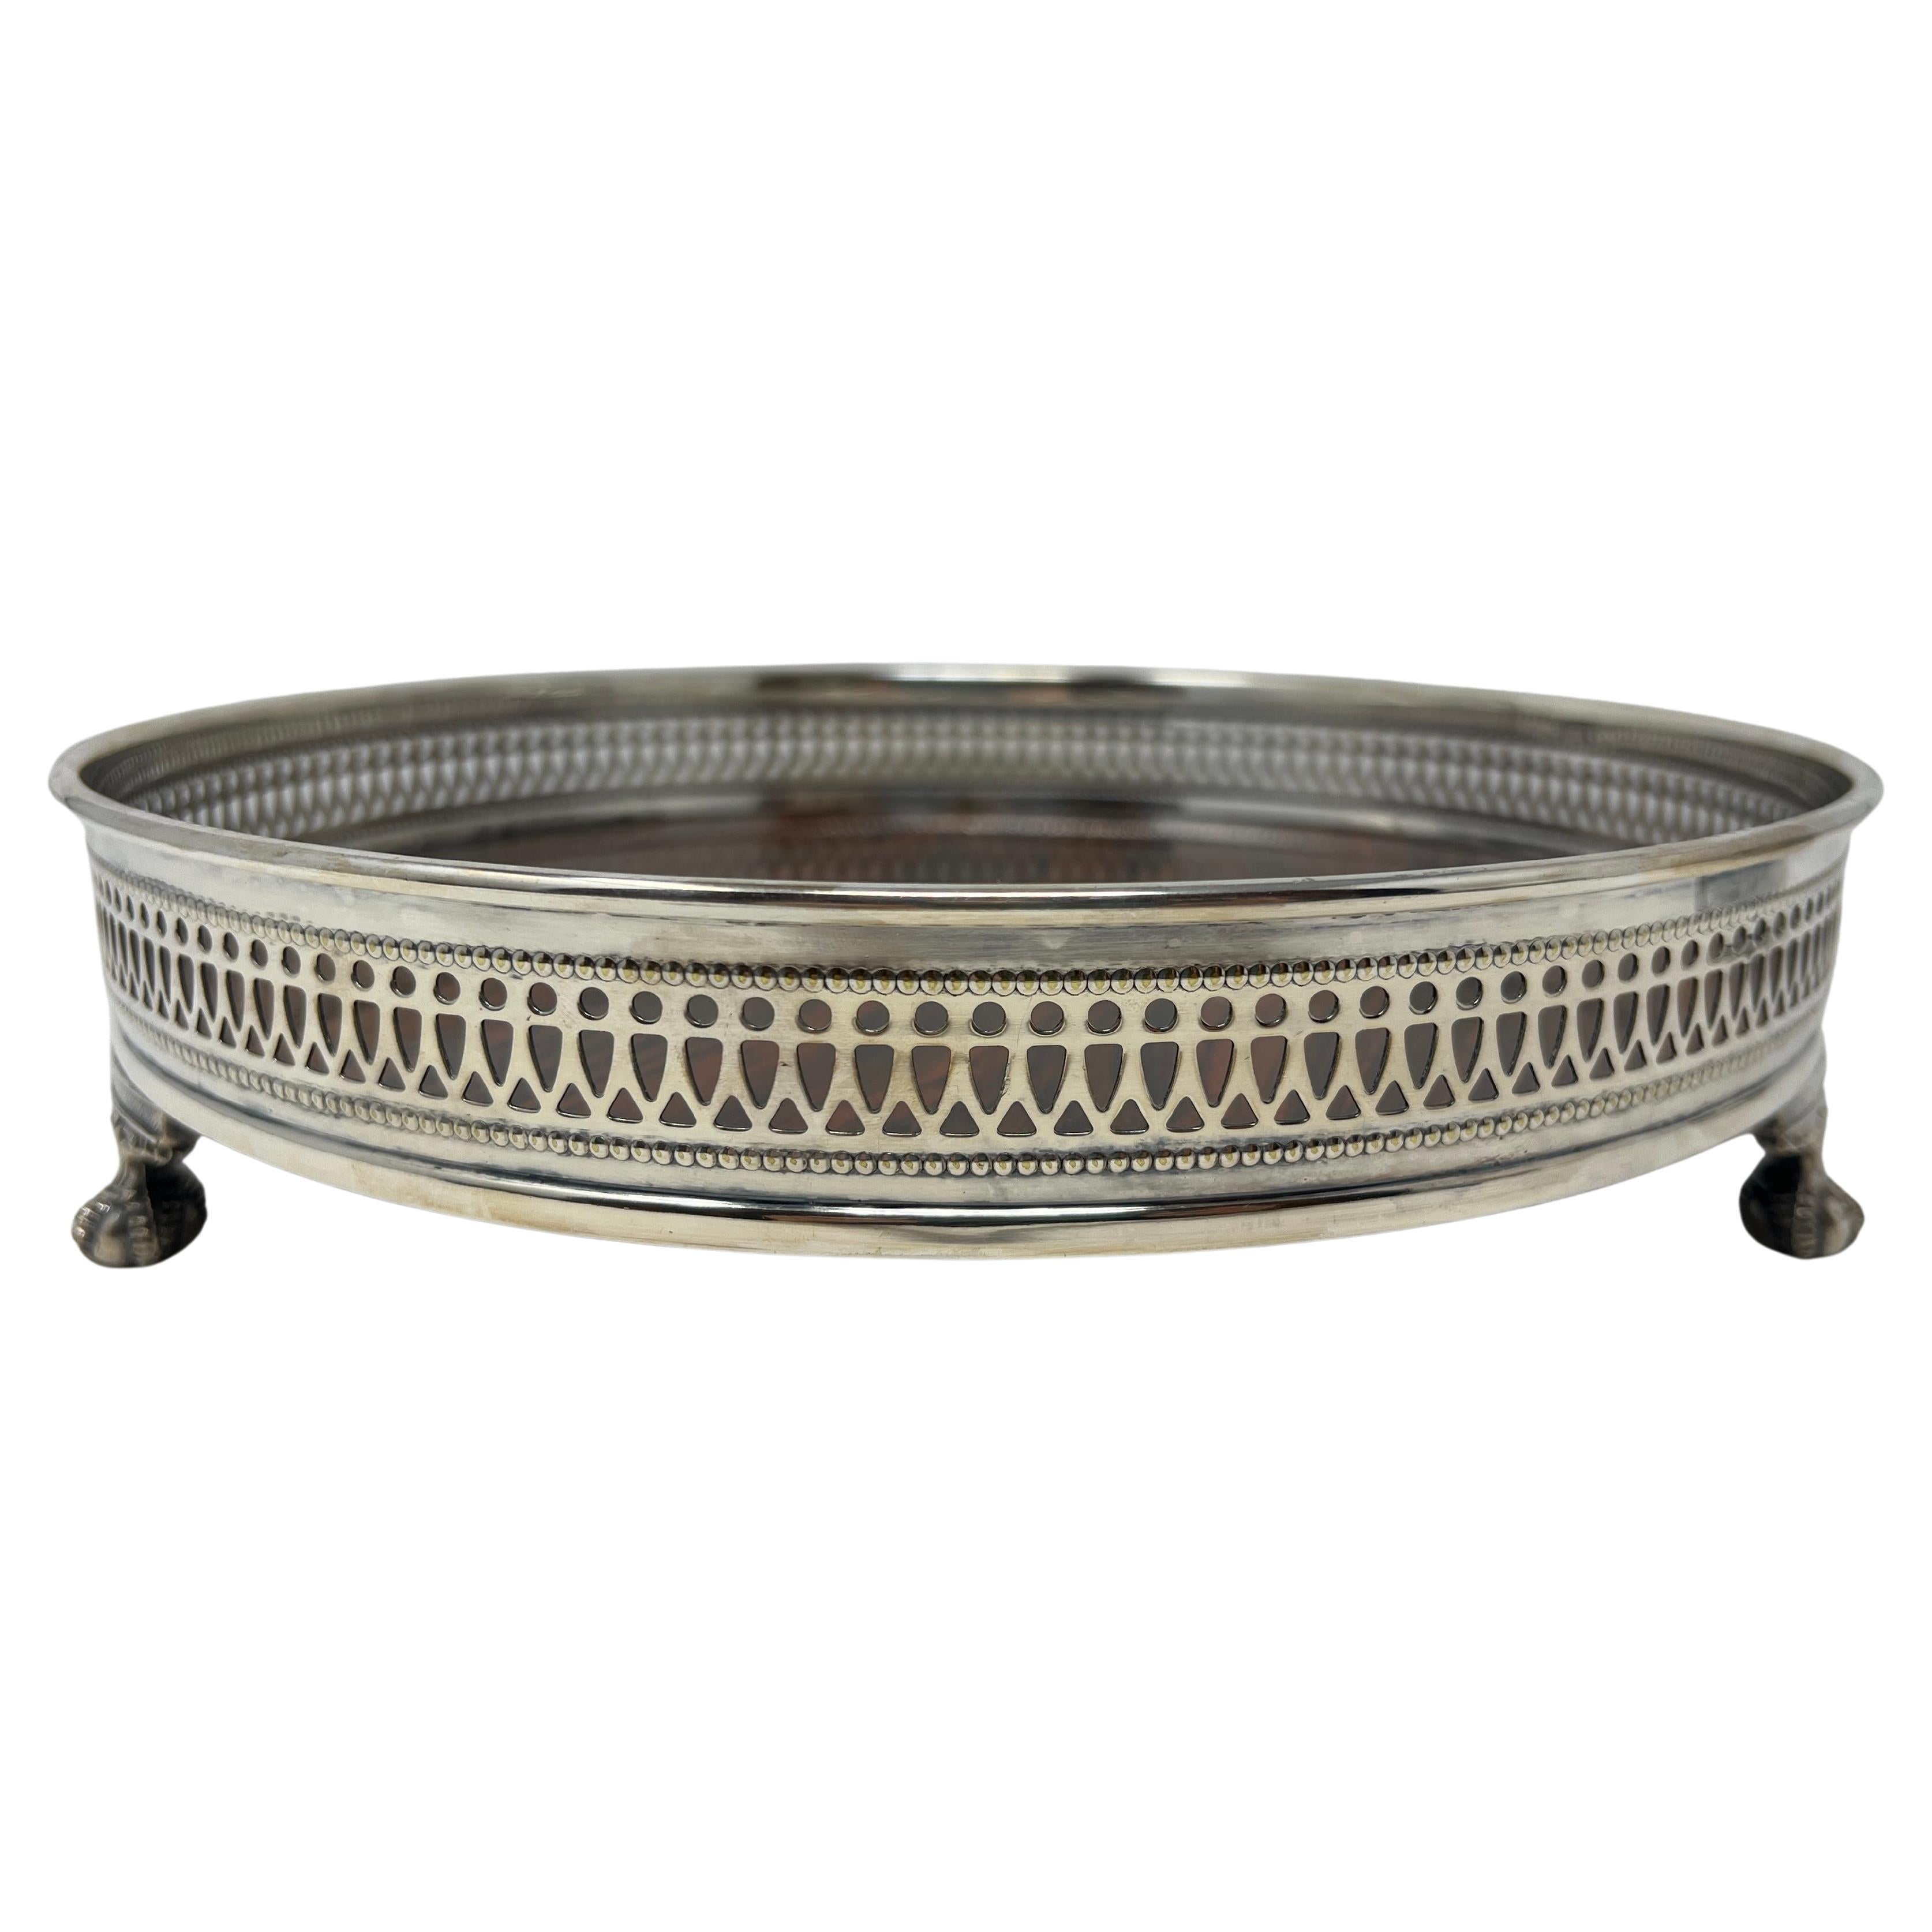 Estate English Silver-Plate Footed Galleried Tray, Circa 1950s-1960s. For Sale